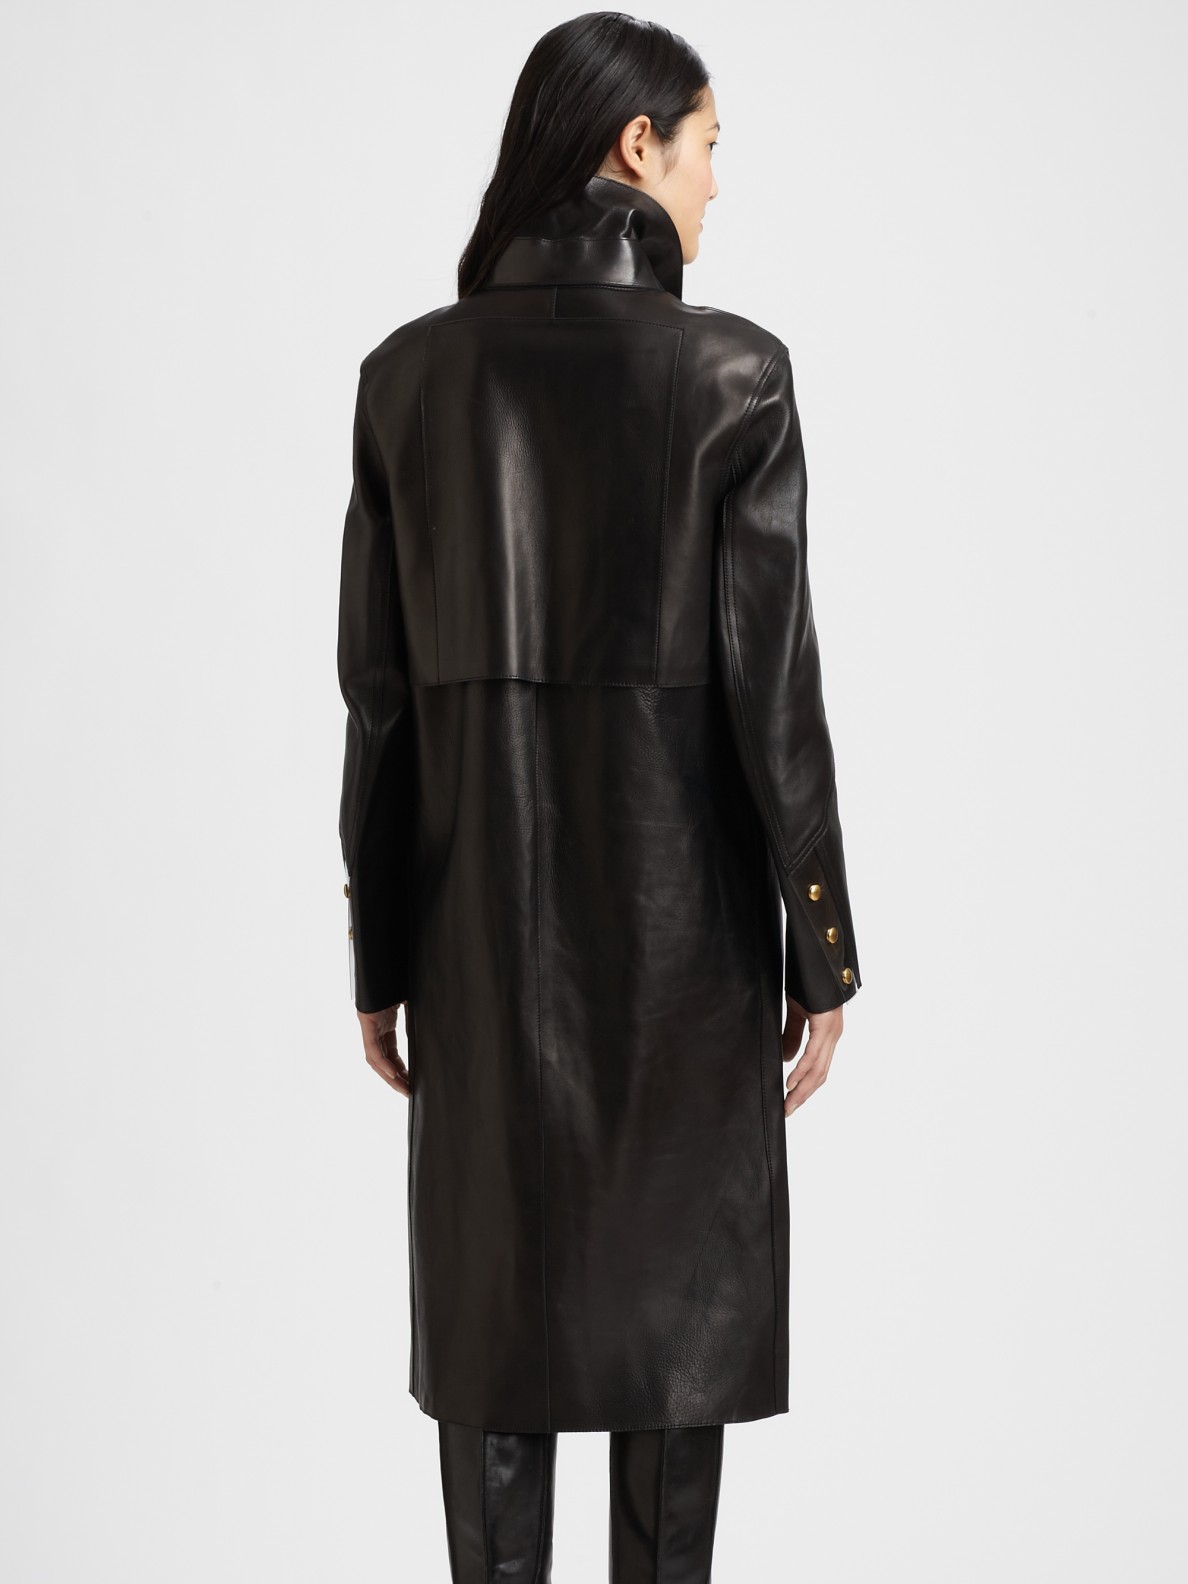 Alexander Wang Leather Trench Coat in Black | Lyst